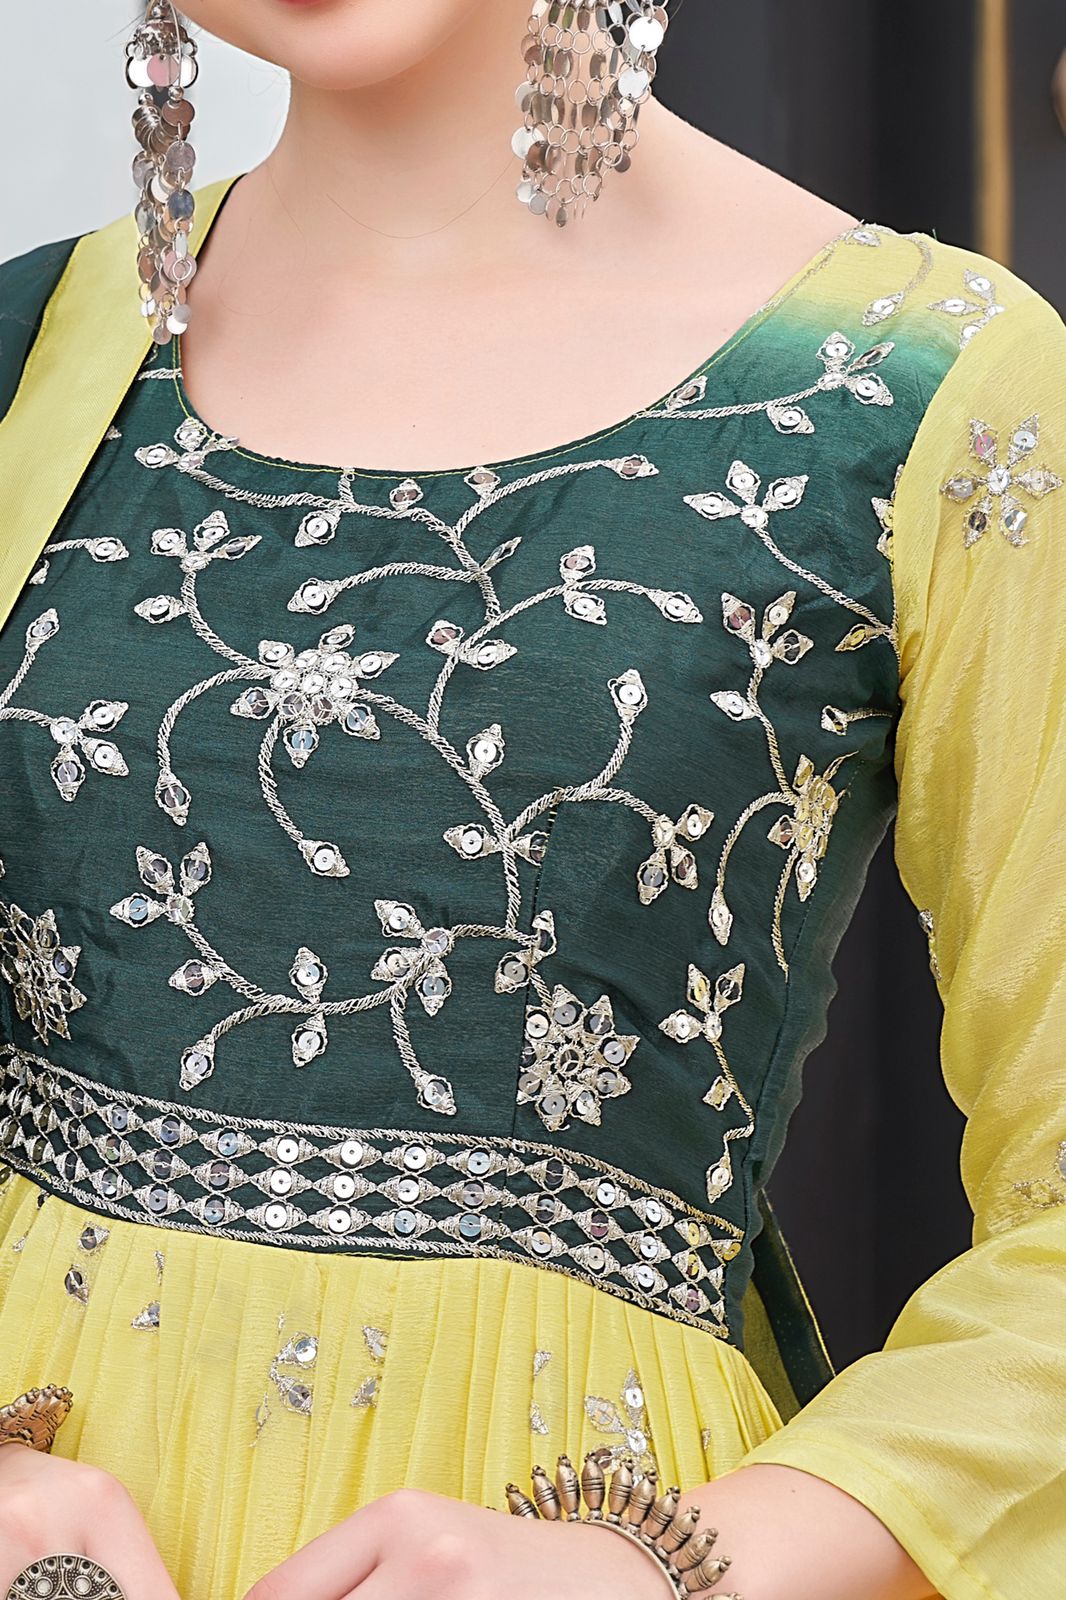 Yellow Green Shades Salwar Suit - Absolutely Desi